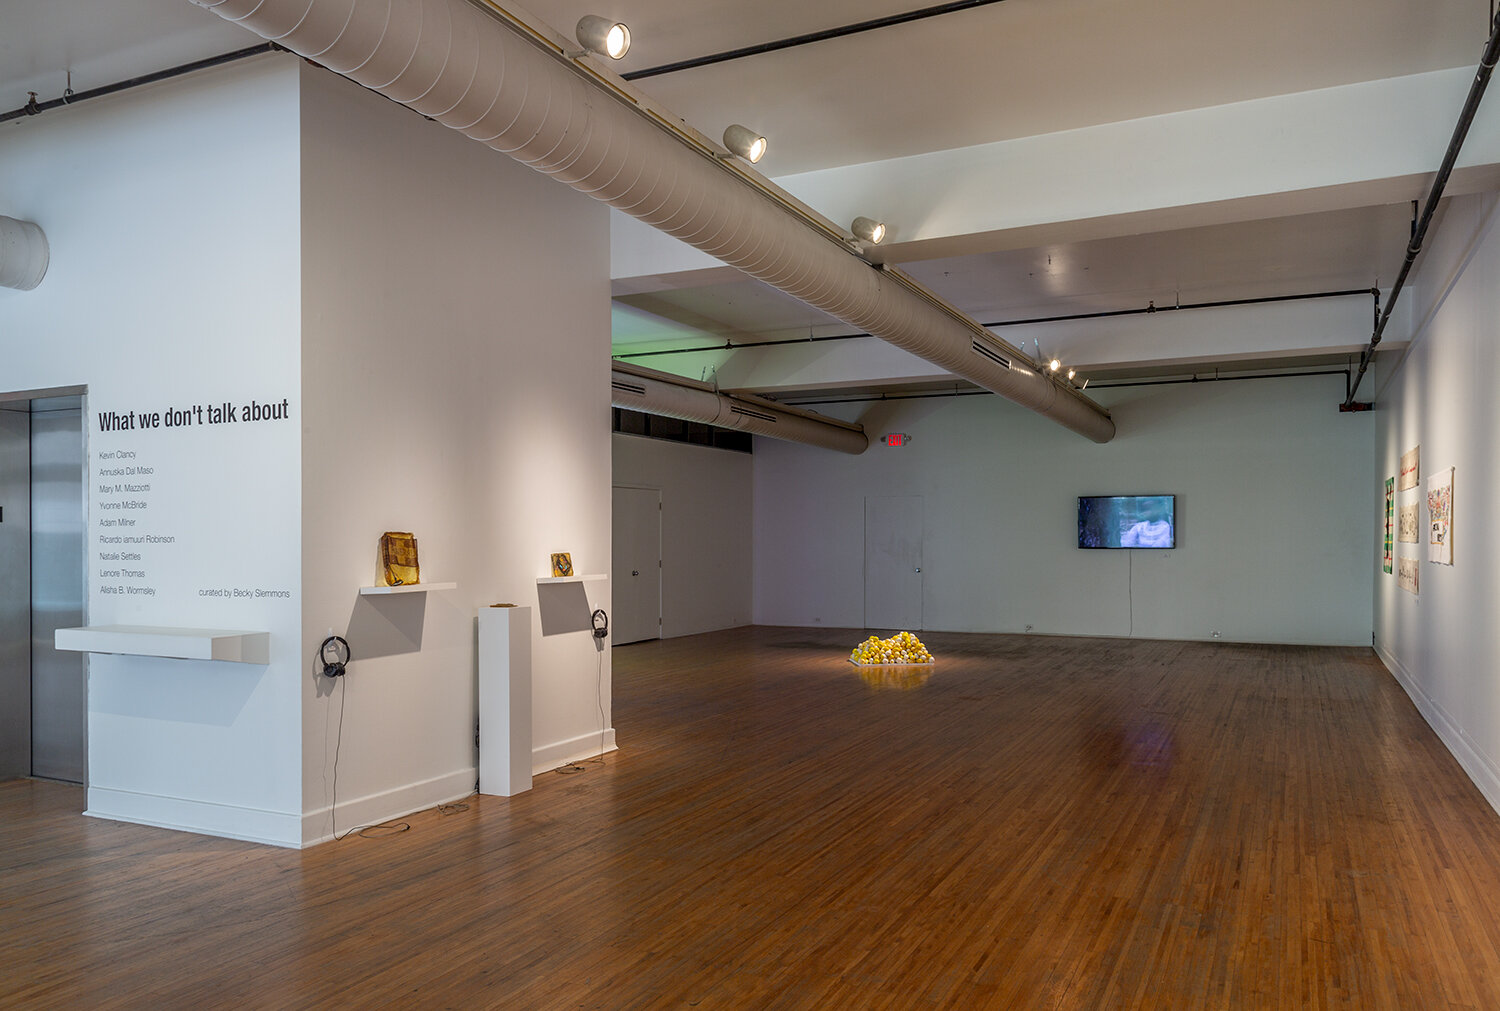  Left to right, artwork by: Alisha B. Wormsley, Lenore Thomas (installation), Alisha B. Wormsley (video), and Mary M. Mazziotti (embroidered textiles on wall, at extreme angle). Photo by Ivette Spradlin.  